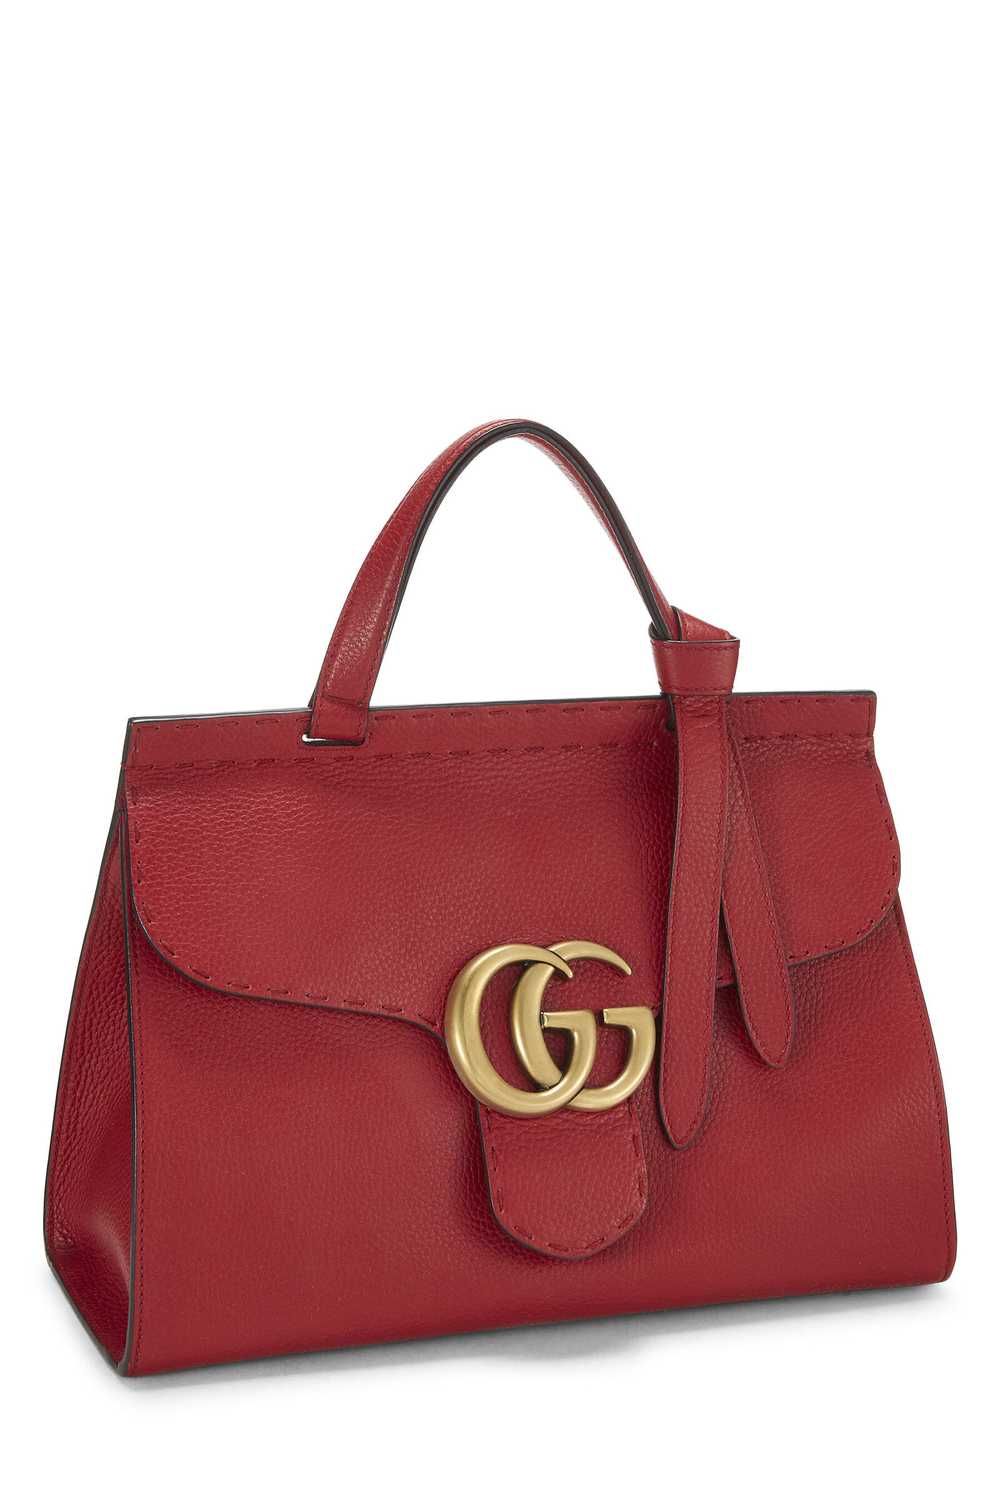 Red Leather GG Marmont Top Handle Flap Bag Small - image 2